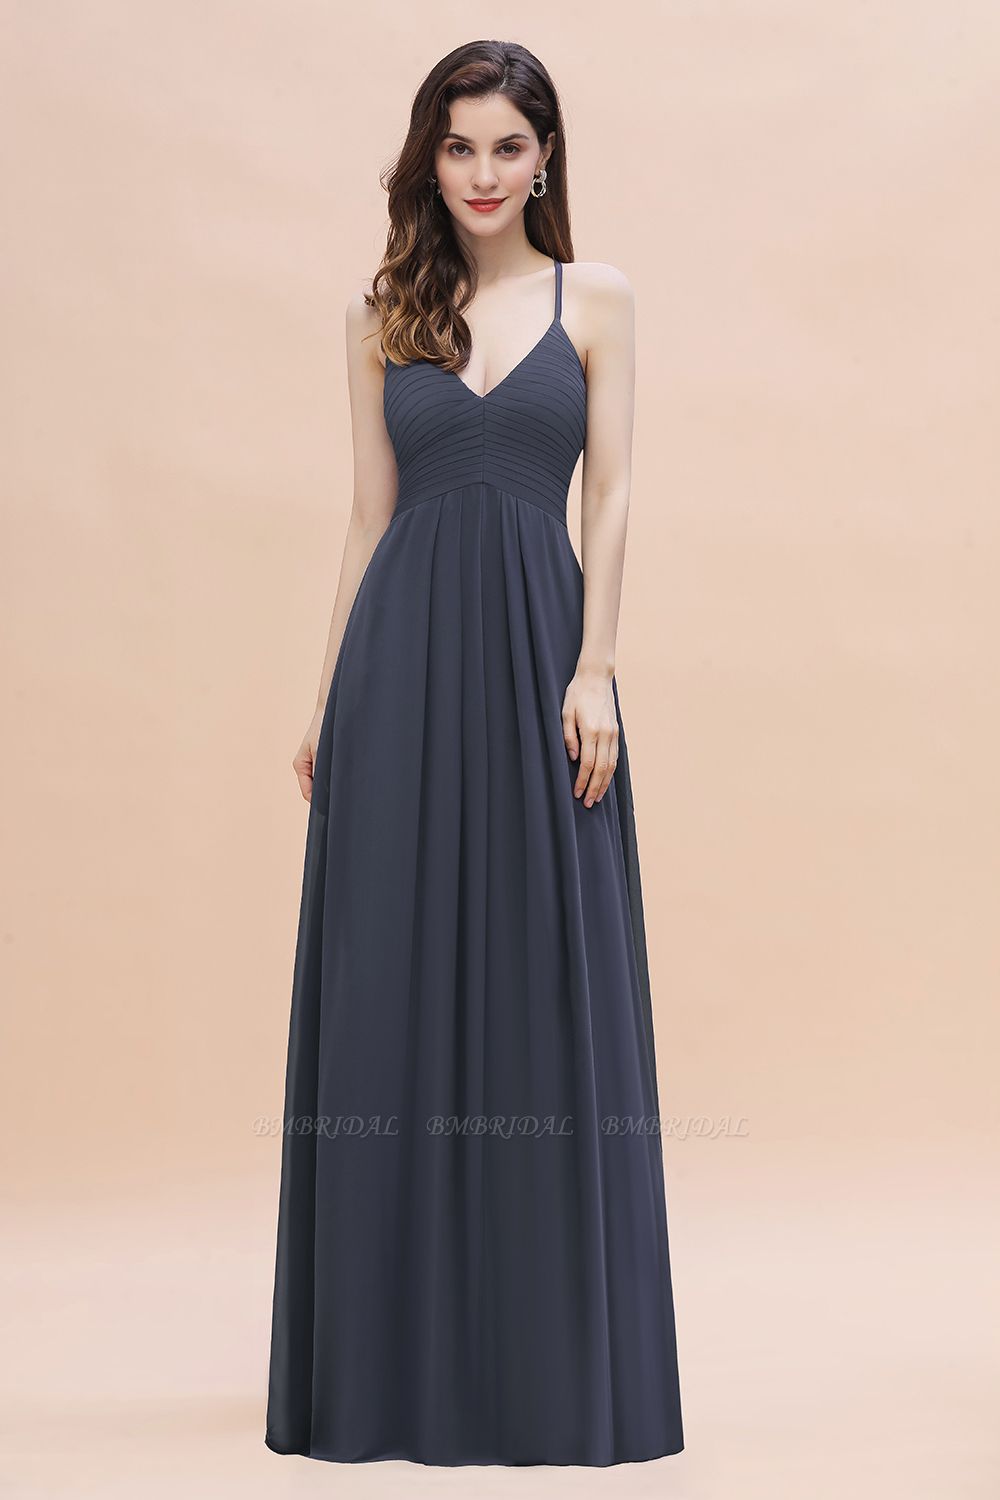 BMbridal Simple Spaghetti Straps Stormy Chiffon Bridesmaid Dress with Ruffles On Sale